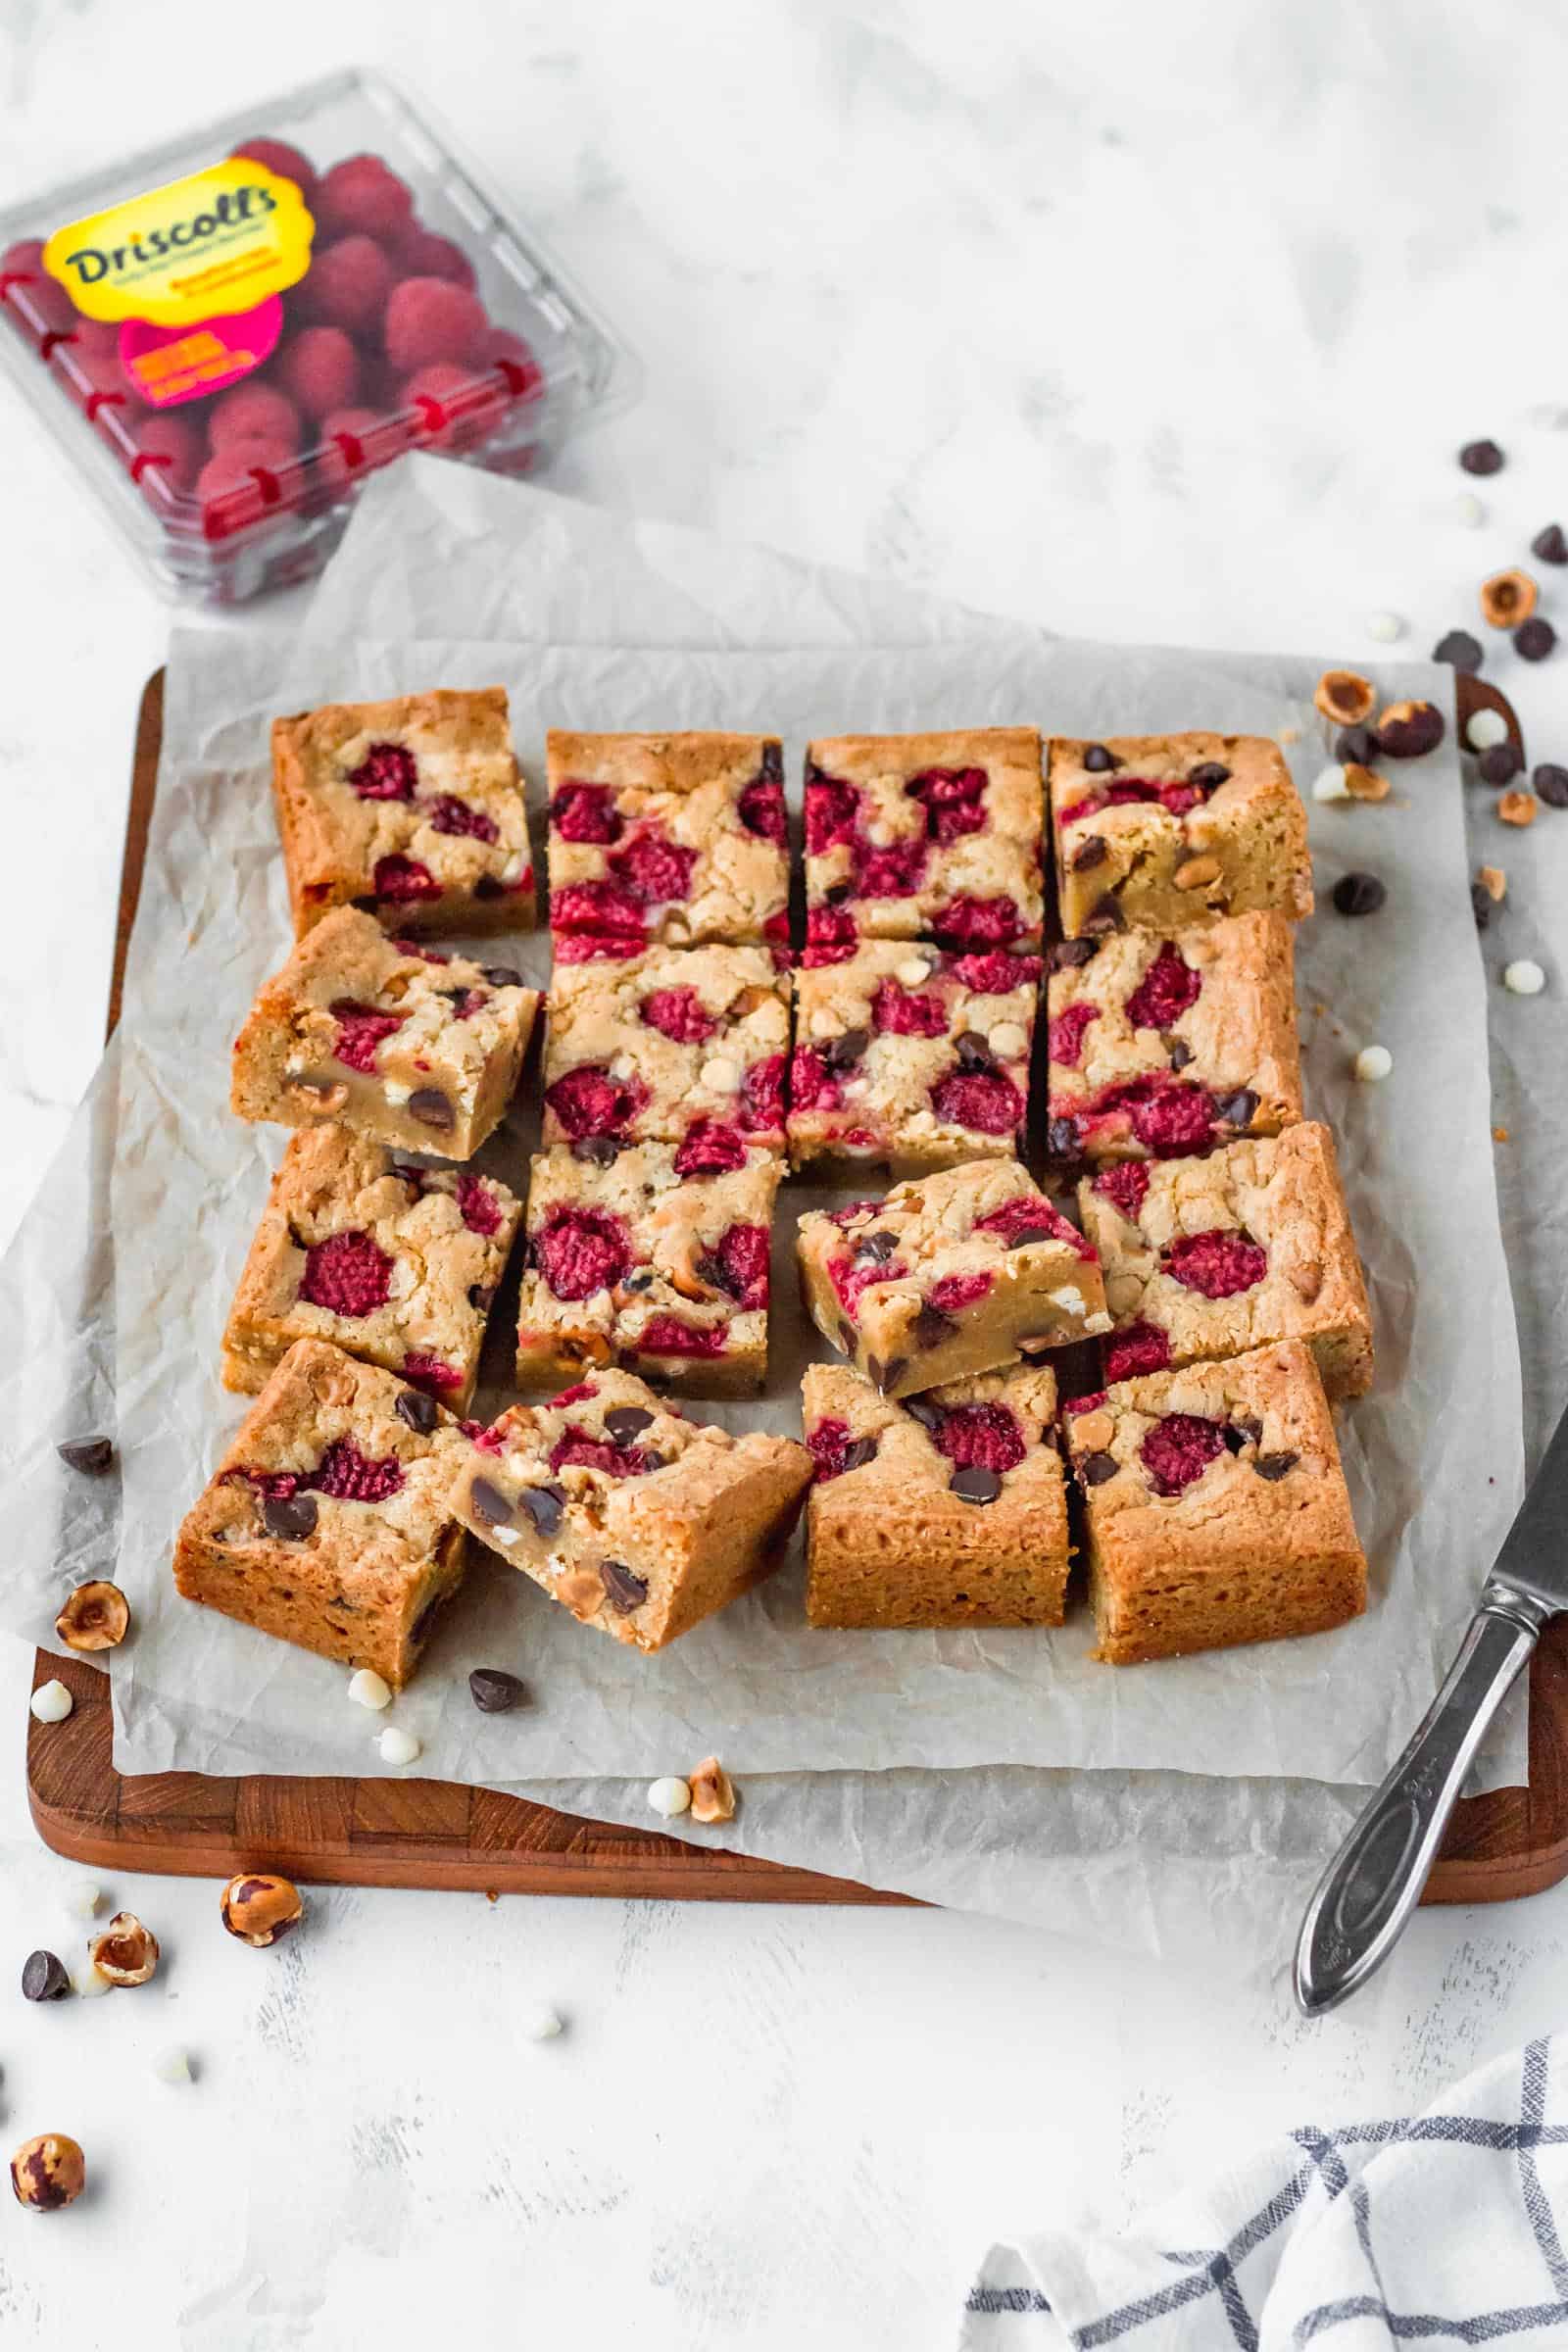 Raspberry hazelnut blondies with semisweet chocolate chips and white chocolate chips